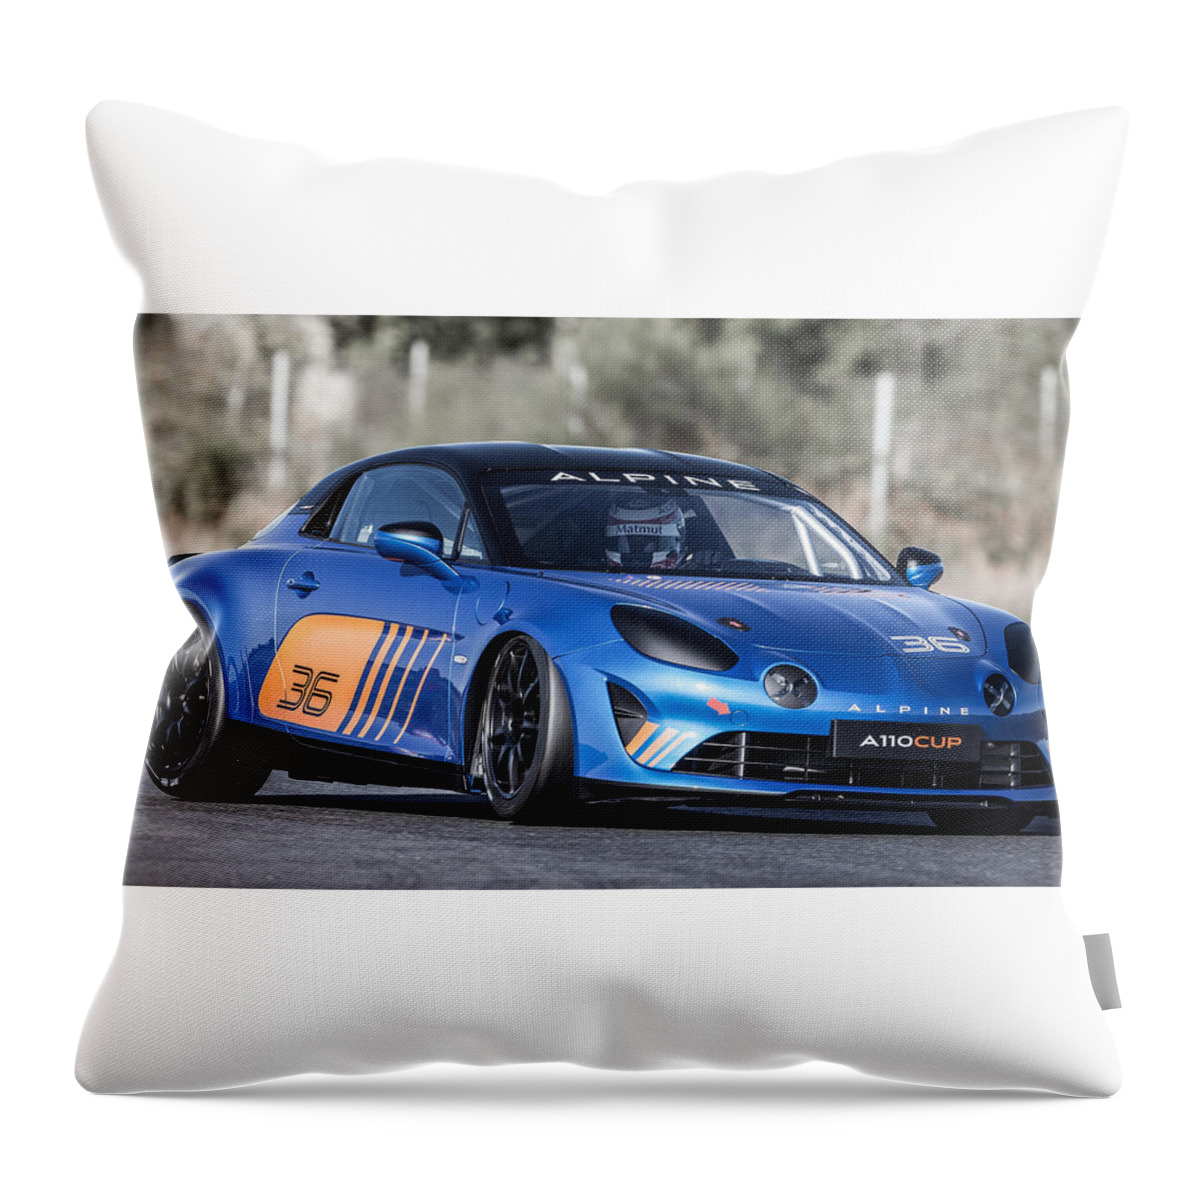 Alpine A110 Cup Throw Pillow featuring the digital art Alpine A110 Cup by Super Lovely